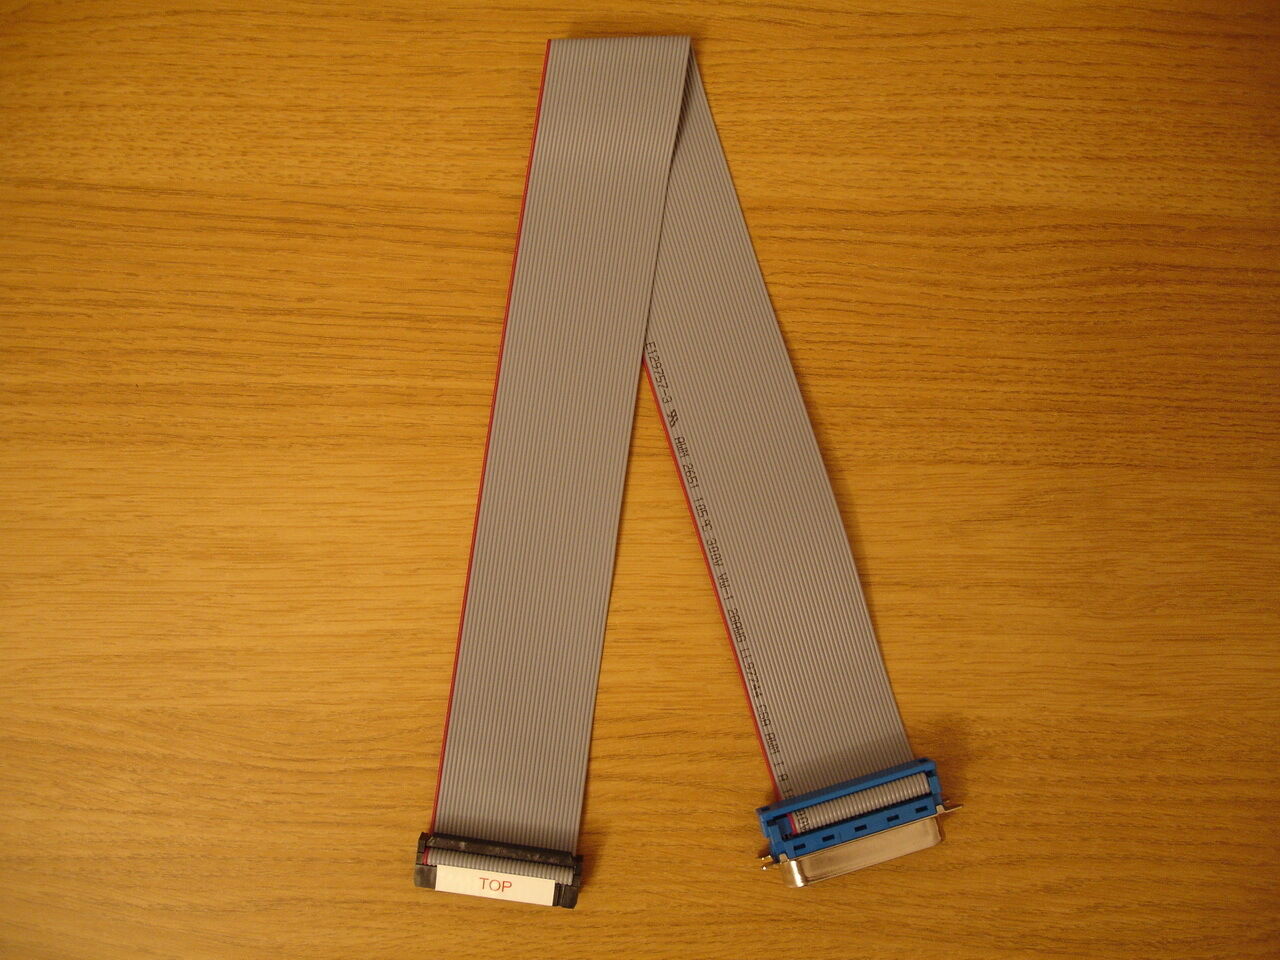 Amstrad CPC+ plus 6128 ribbon cable for DDI-1 / FD-1 and HxC floppy emulator